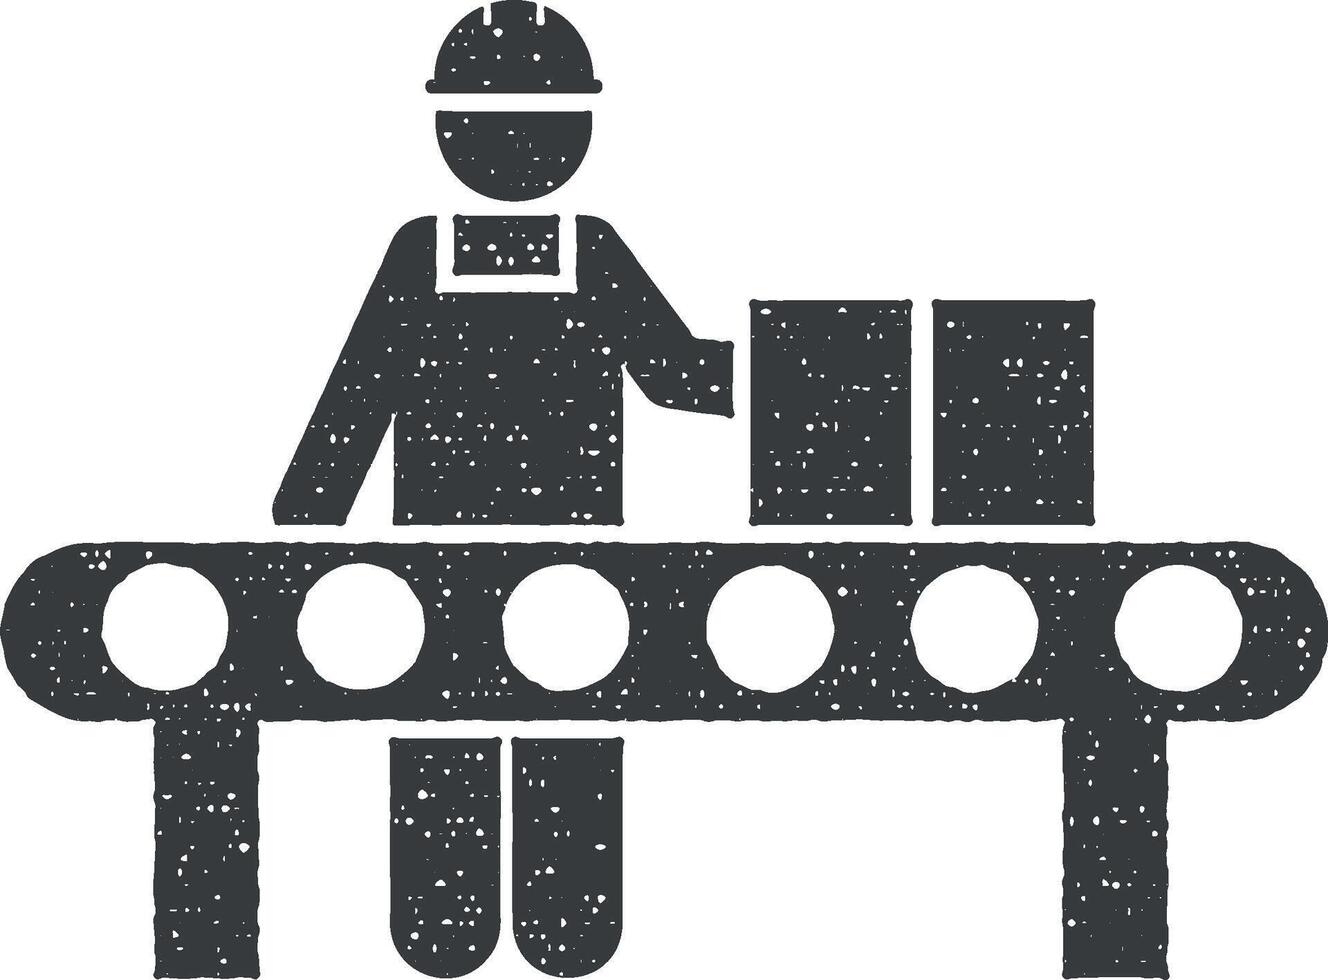 Job, conveyor, production, factory icon vector illustration in stamp style